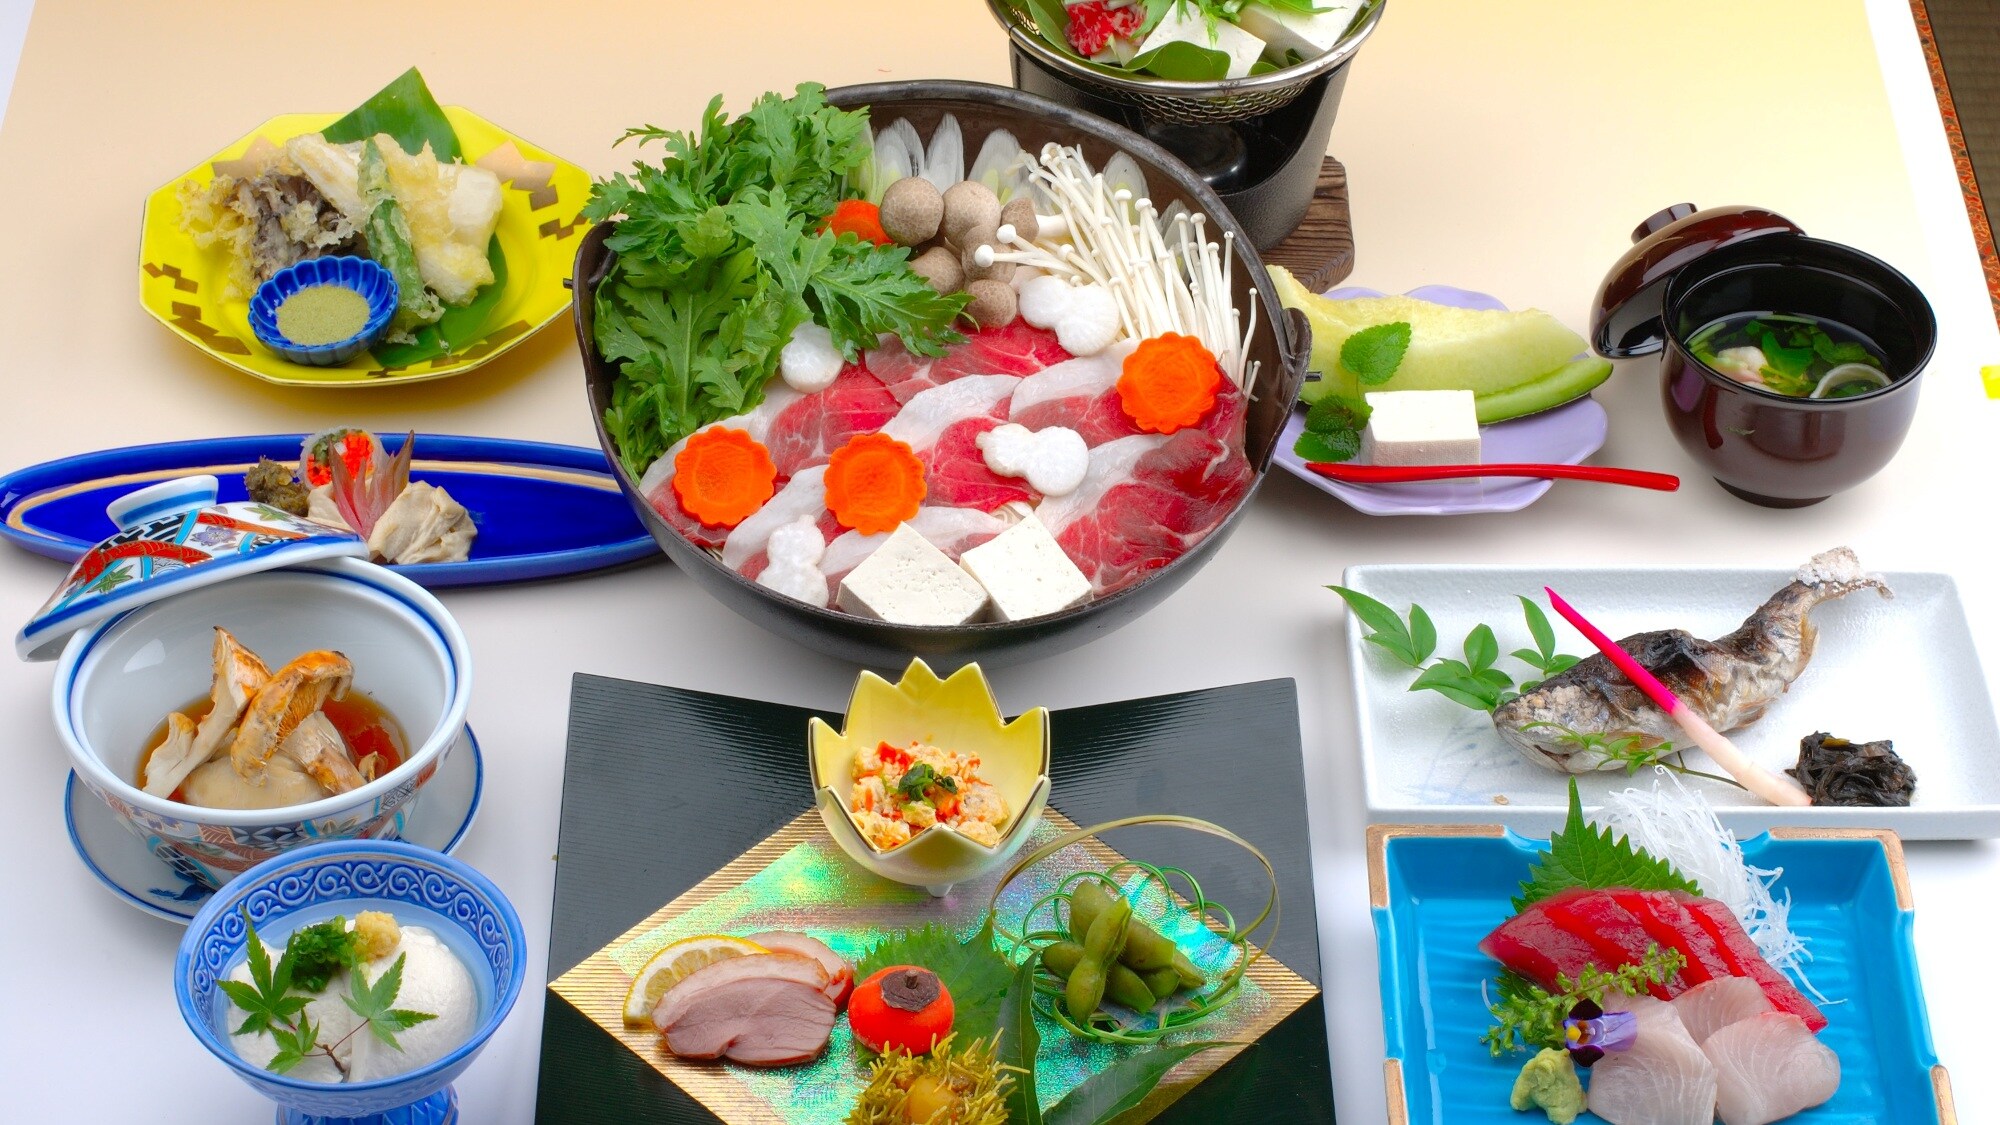 An example of tofu dishes and botan nabe